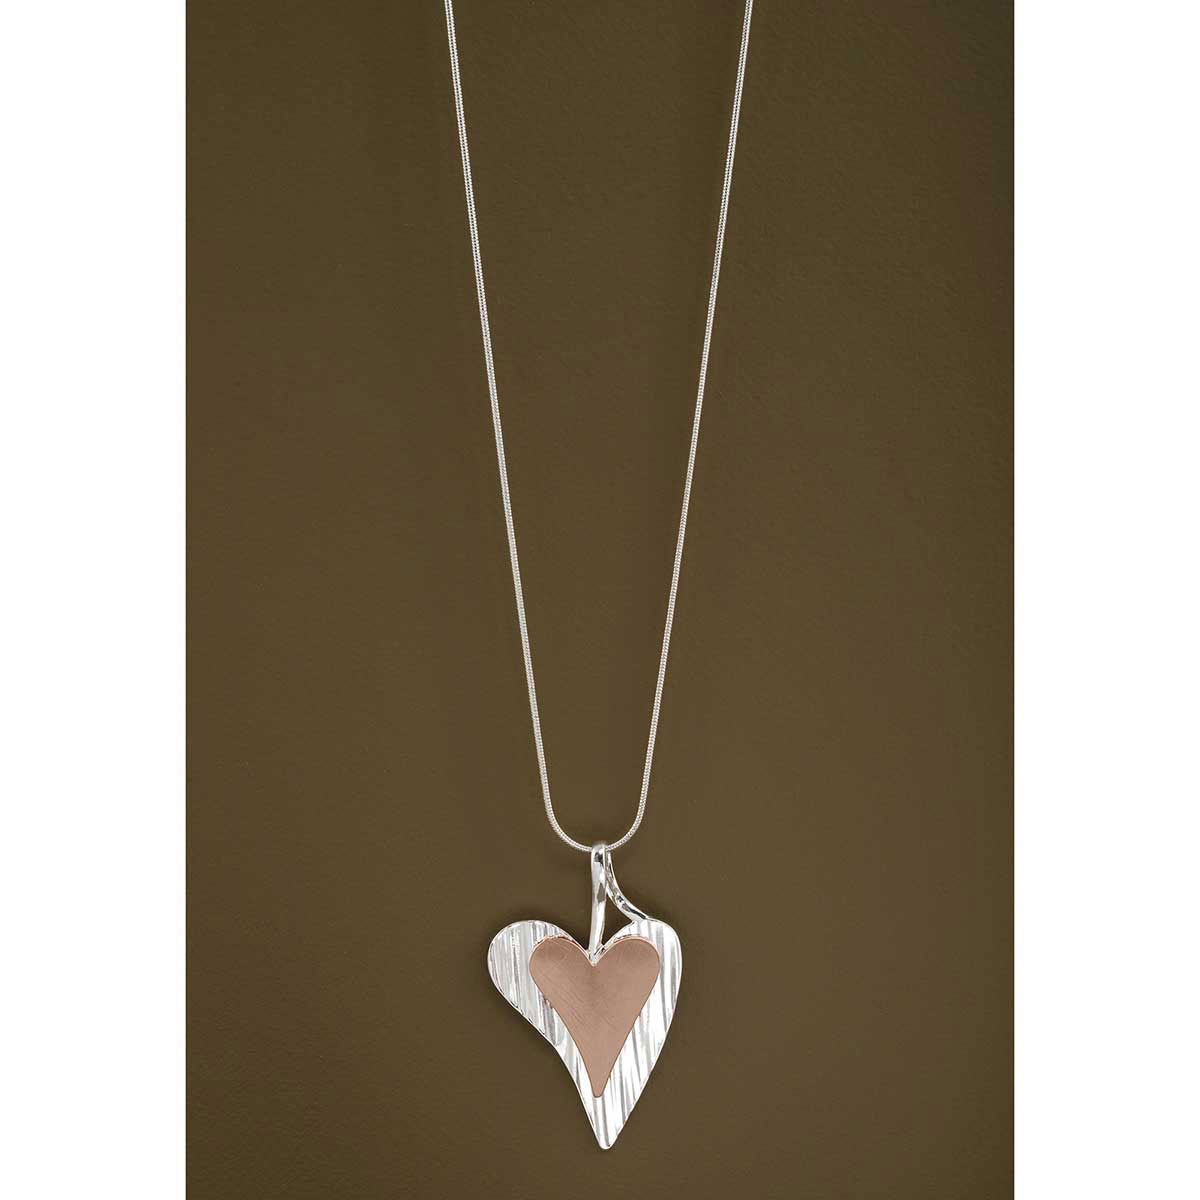 NECKLACE 2-TONE HEART PENDANT 1.75IN X 3IN; 33-35.5IN